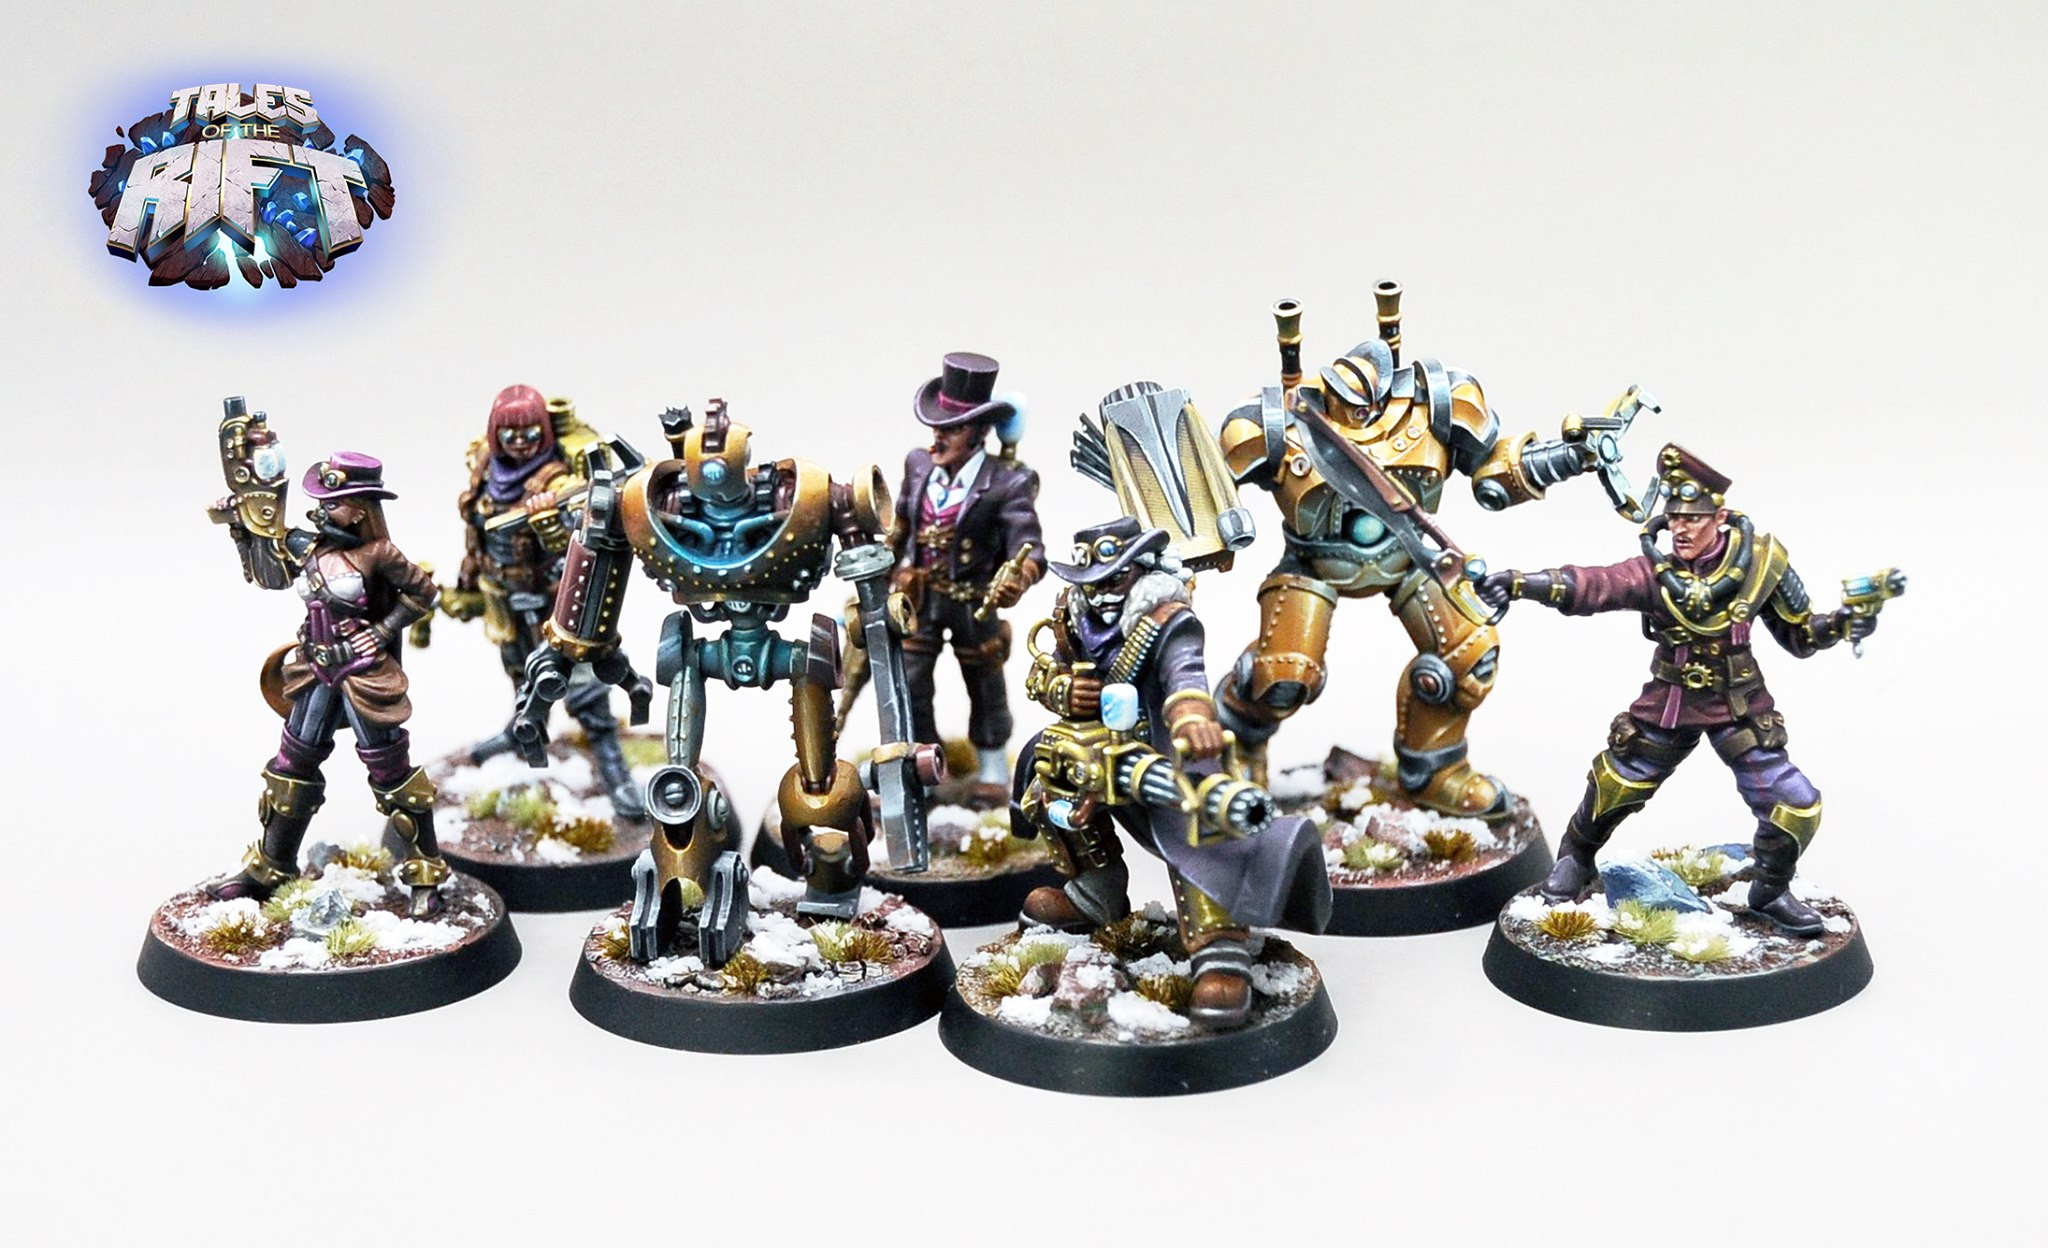 Painted miniatures